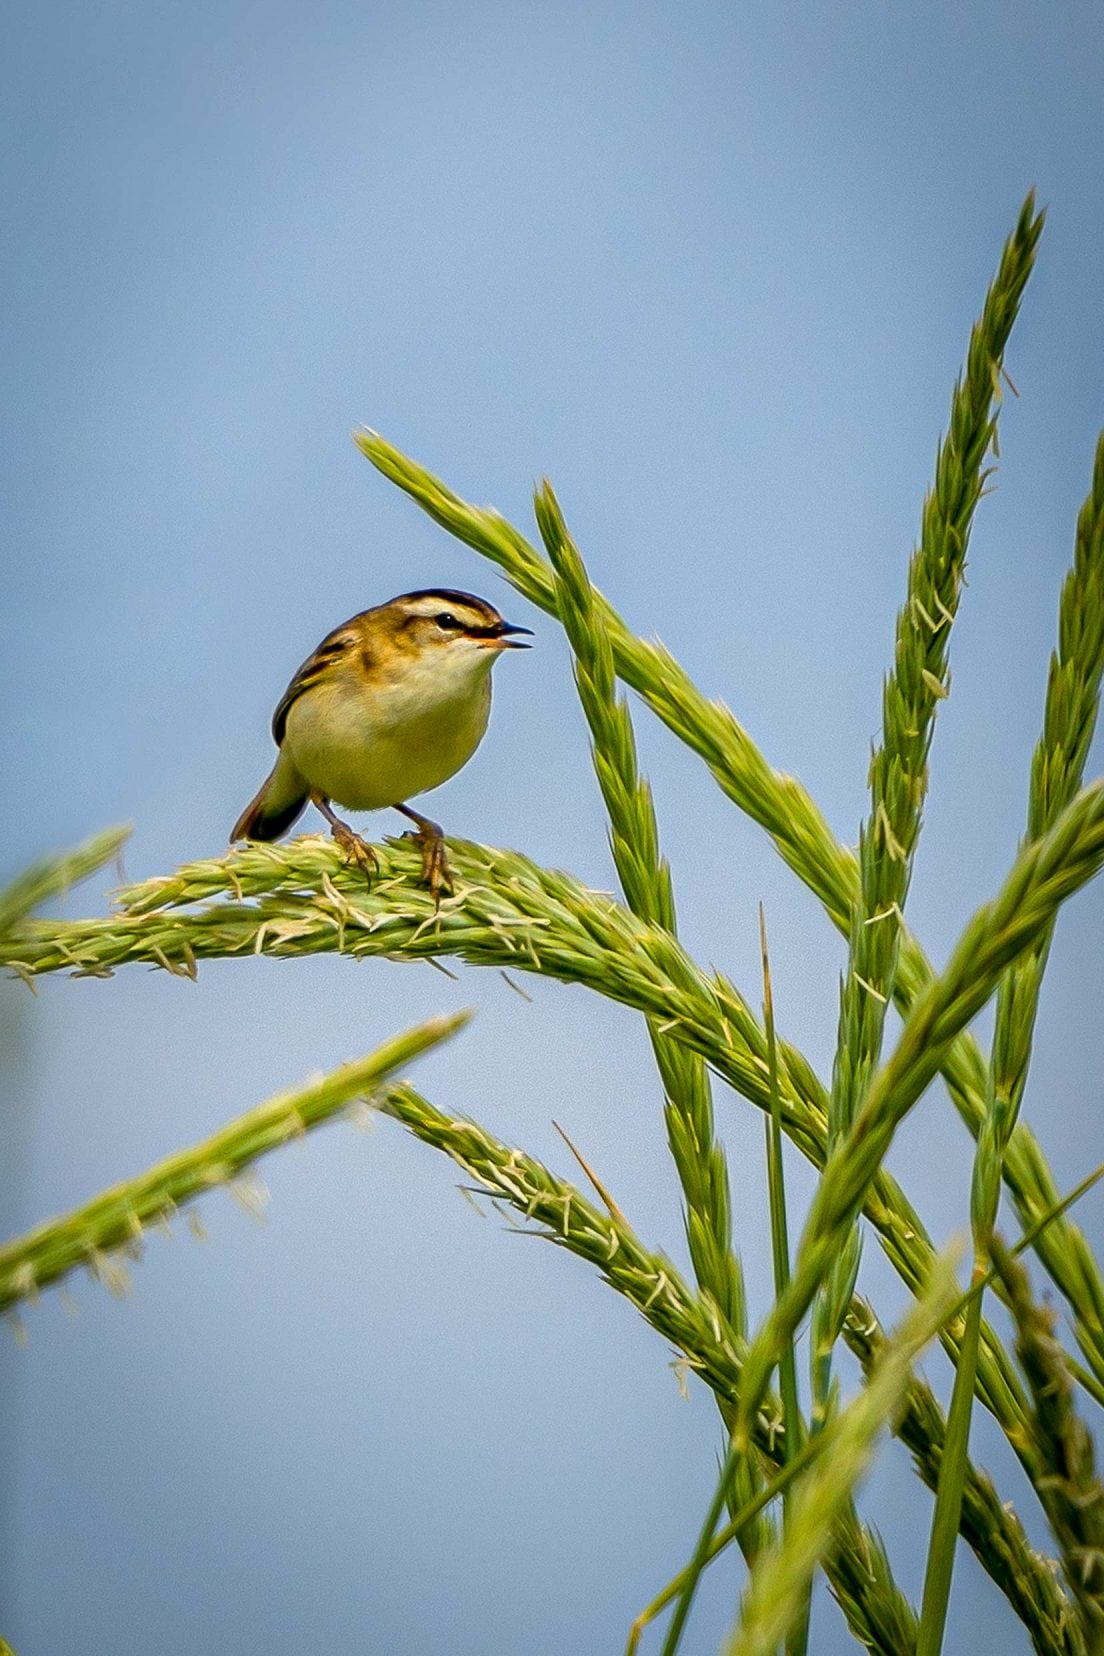 Little brown bird on a reed with blue sky background